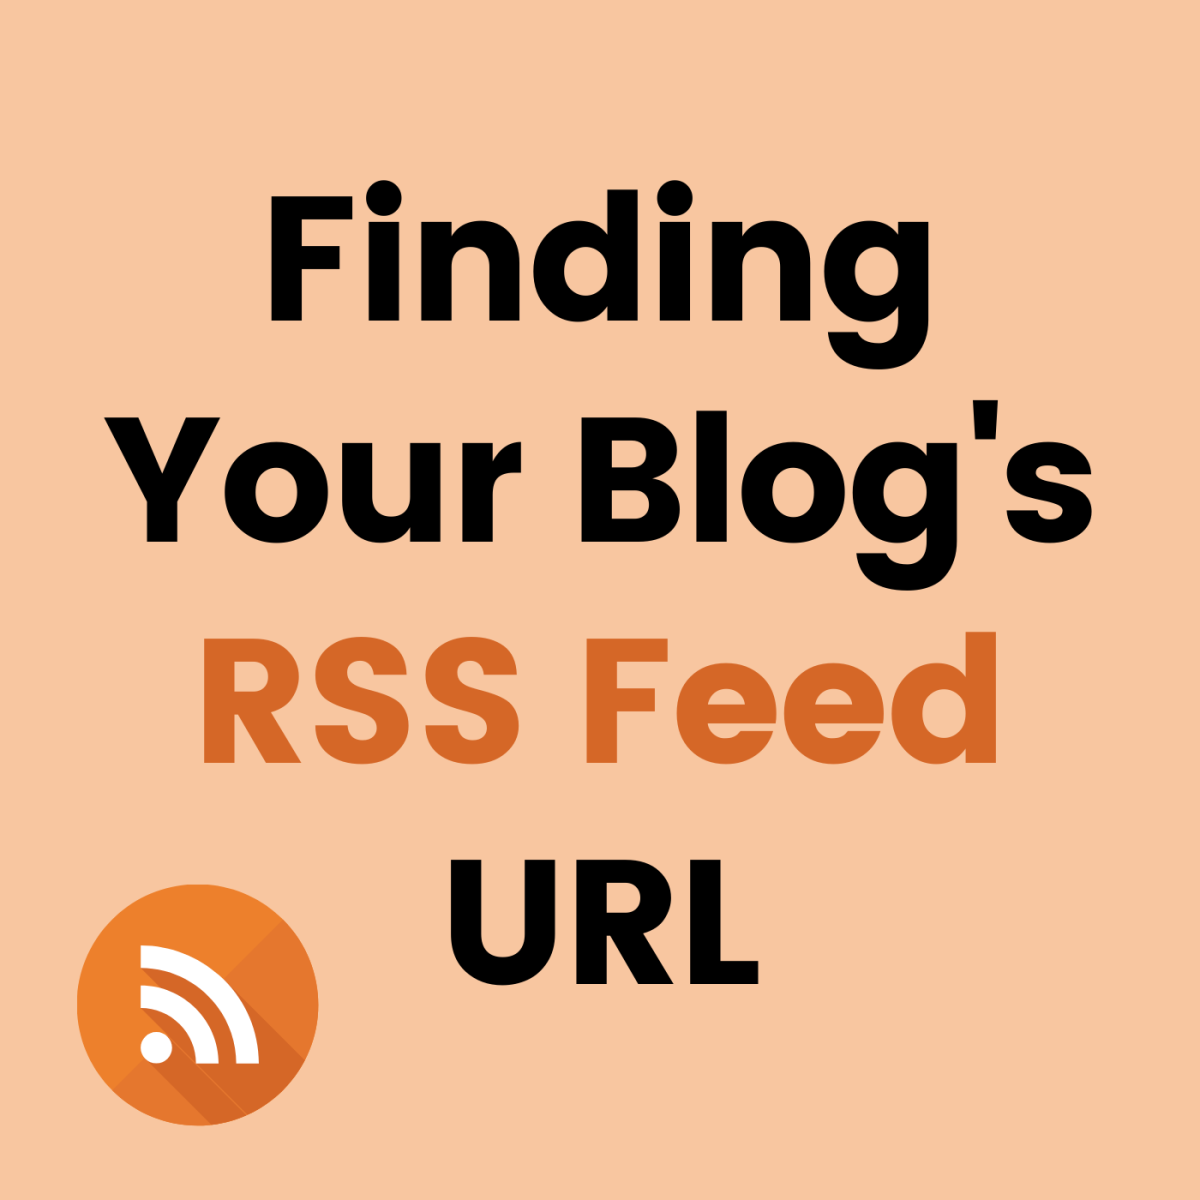 Learn what an RSS feed URL is and how to find it.